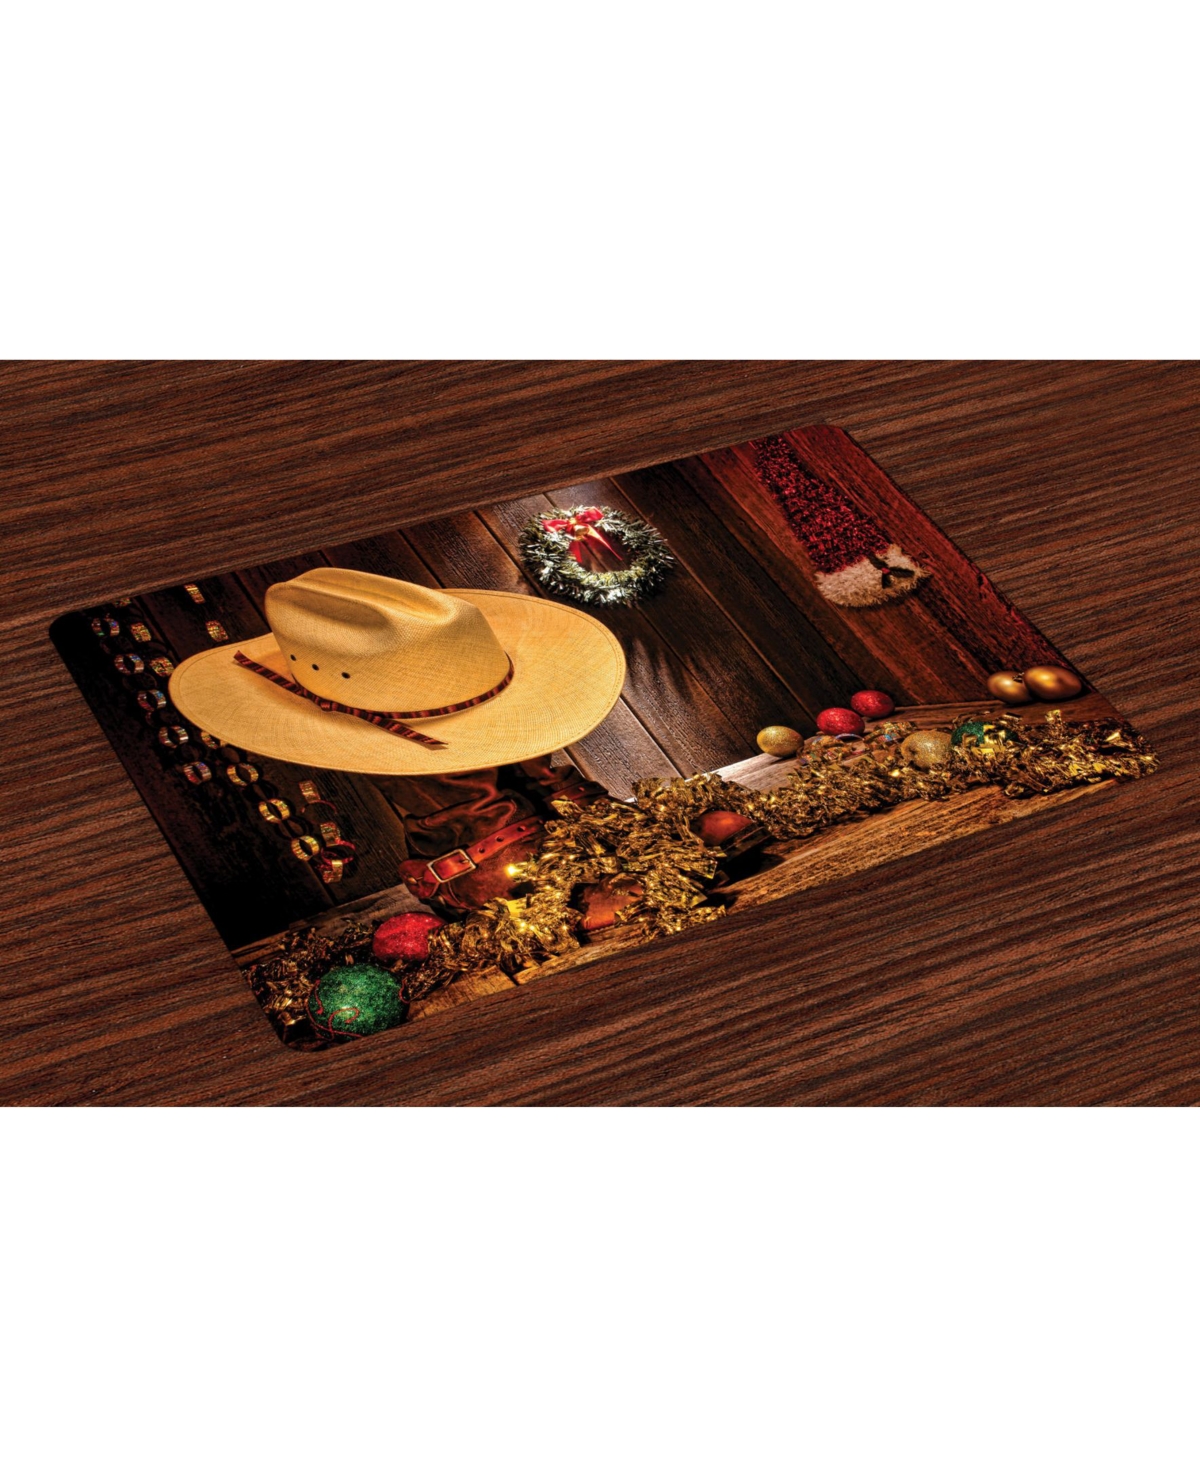 AMBESONNE WESTERN PLACE MATS, SET OF 4